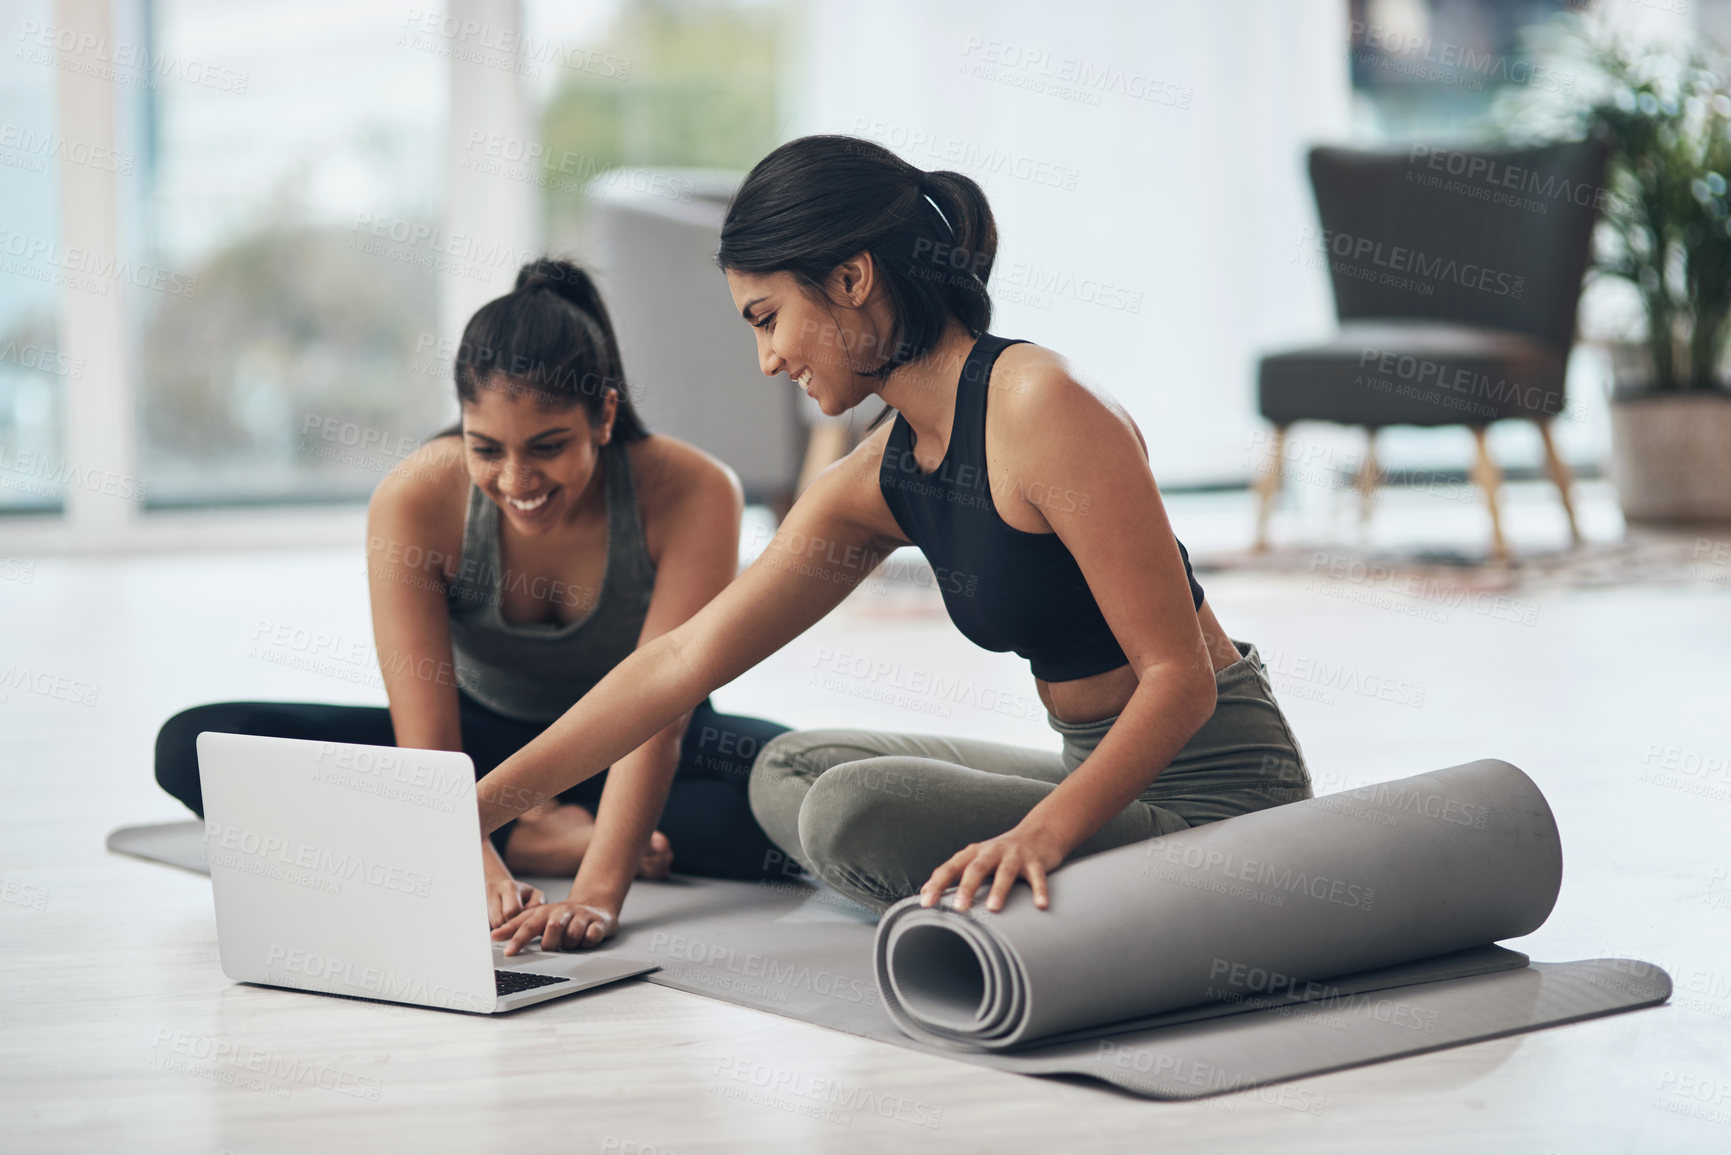 Buy stock photo Shot of two young women using a laptop while working out at home